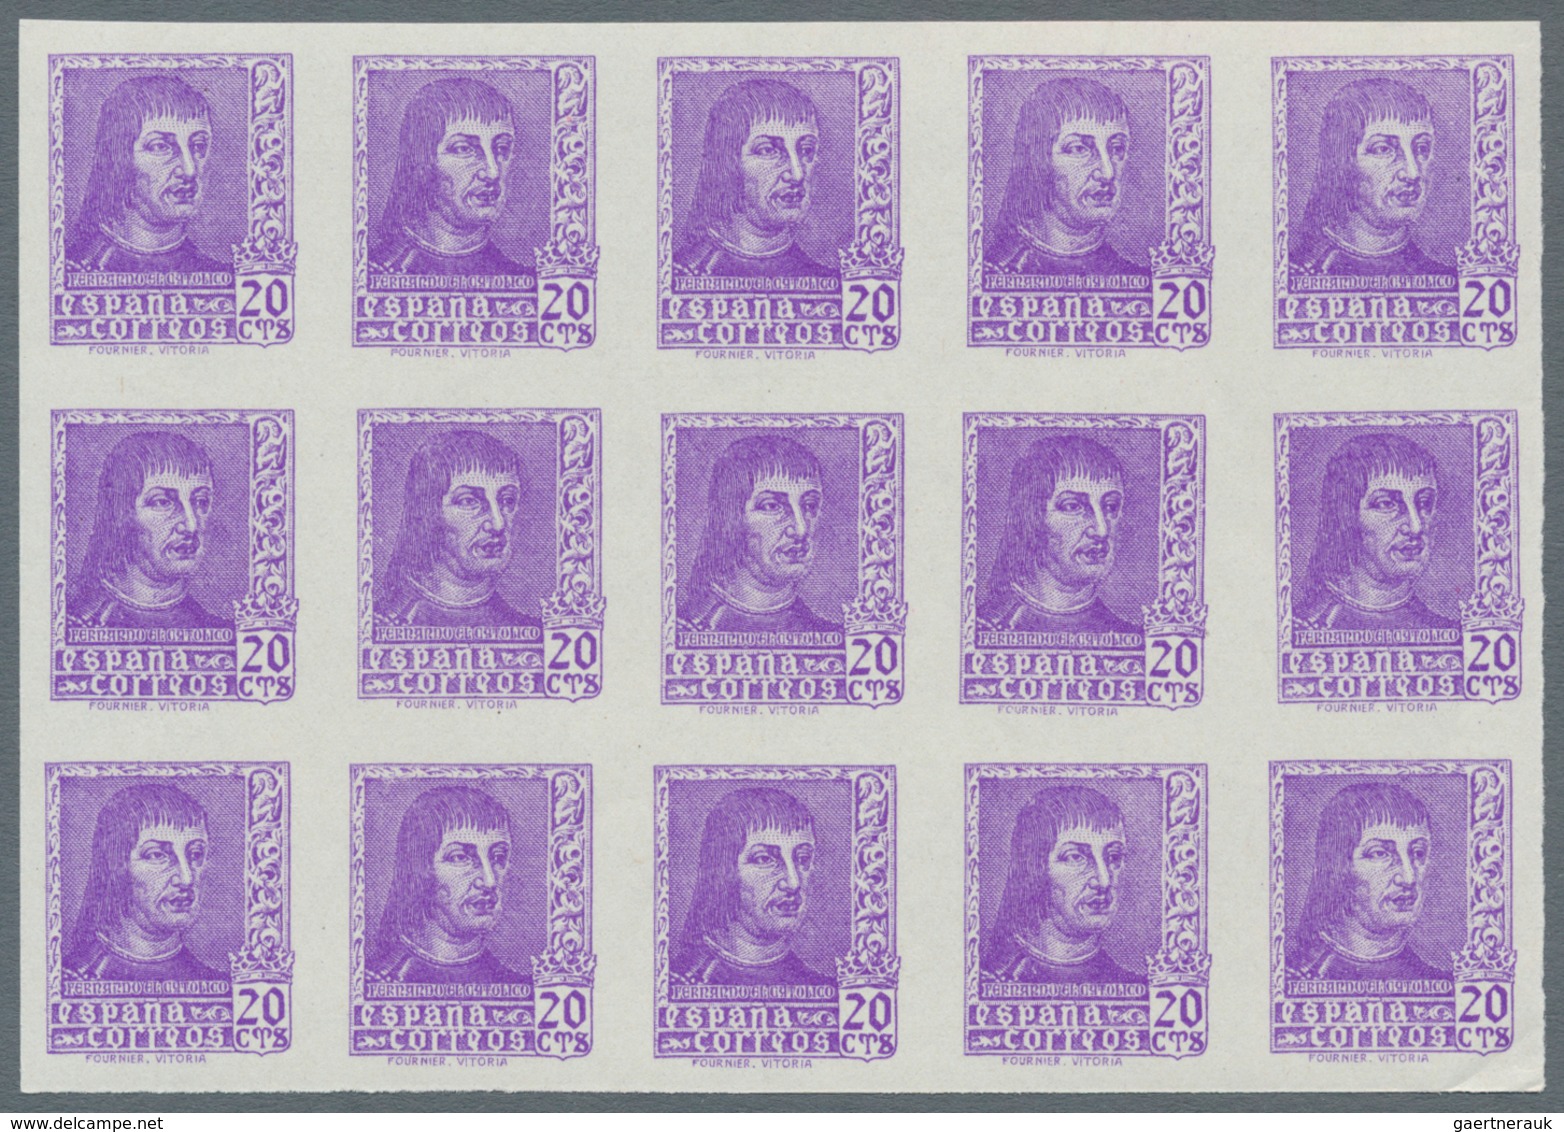 Spanien: 1938, Ferdinand II. five different stamps incl. both imprints of 30c. in IMPERFORATE blocks